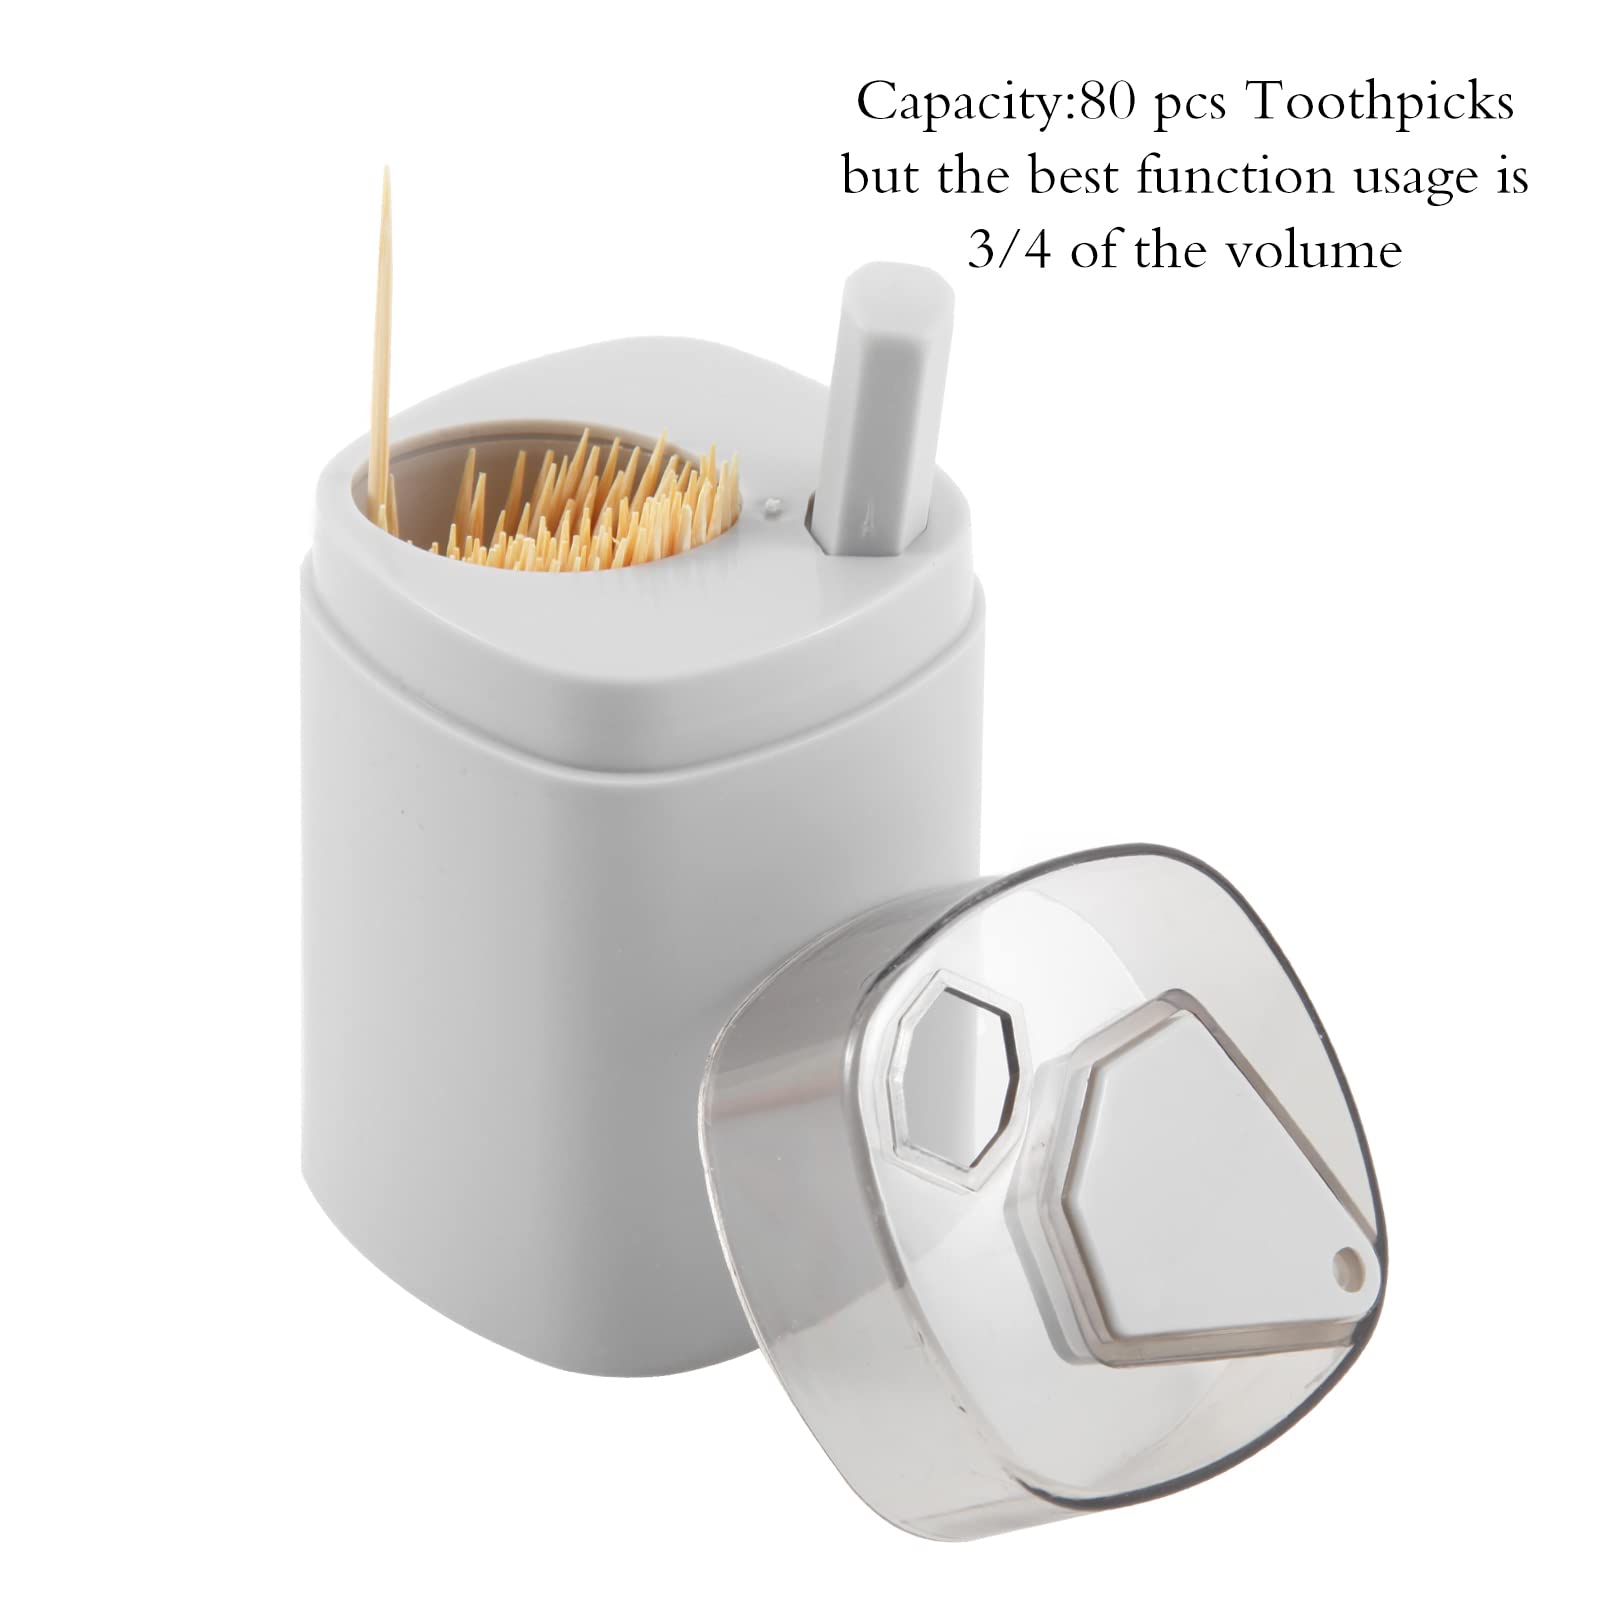 Avesfer 3 PCS Toothpick Holder Dispensers with 900 PCS Toothpicks Pop-Up Automatic Tooth Pick Dispenser for Kitchen Restaurant Thickening Container Pocket Novelty, Sturdy Safe Portable Storage Box